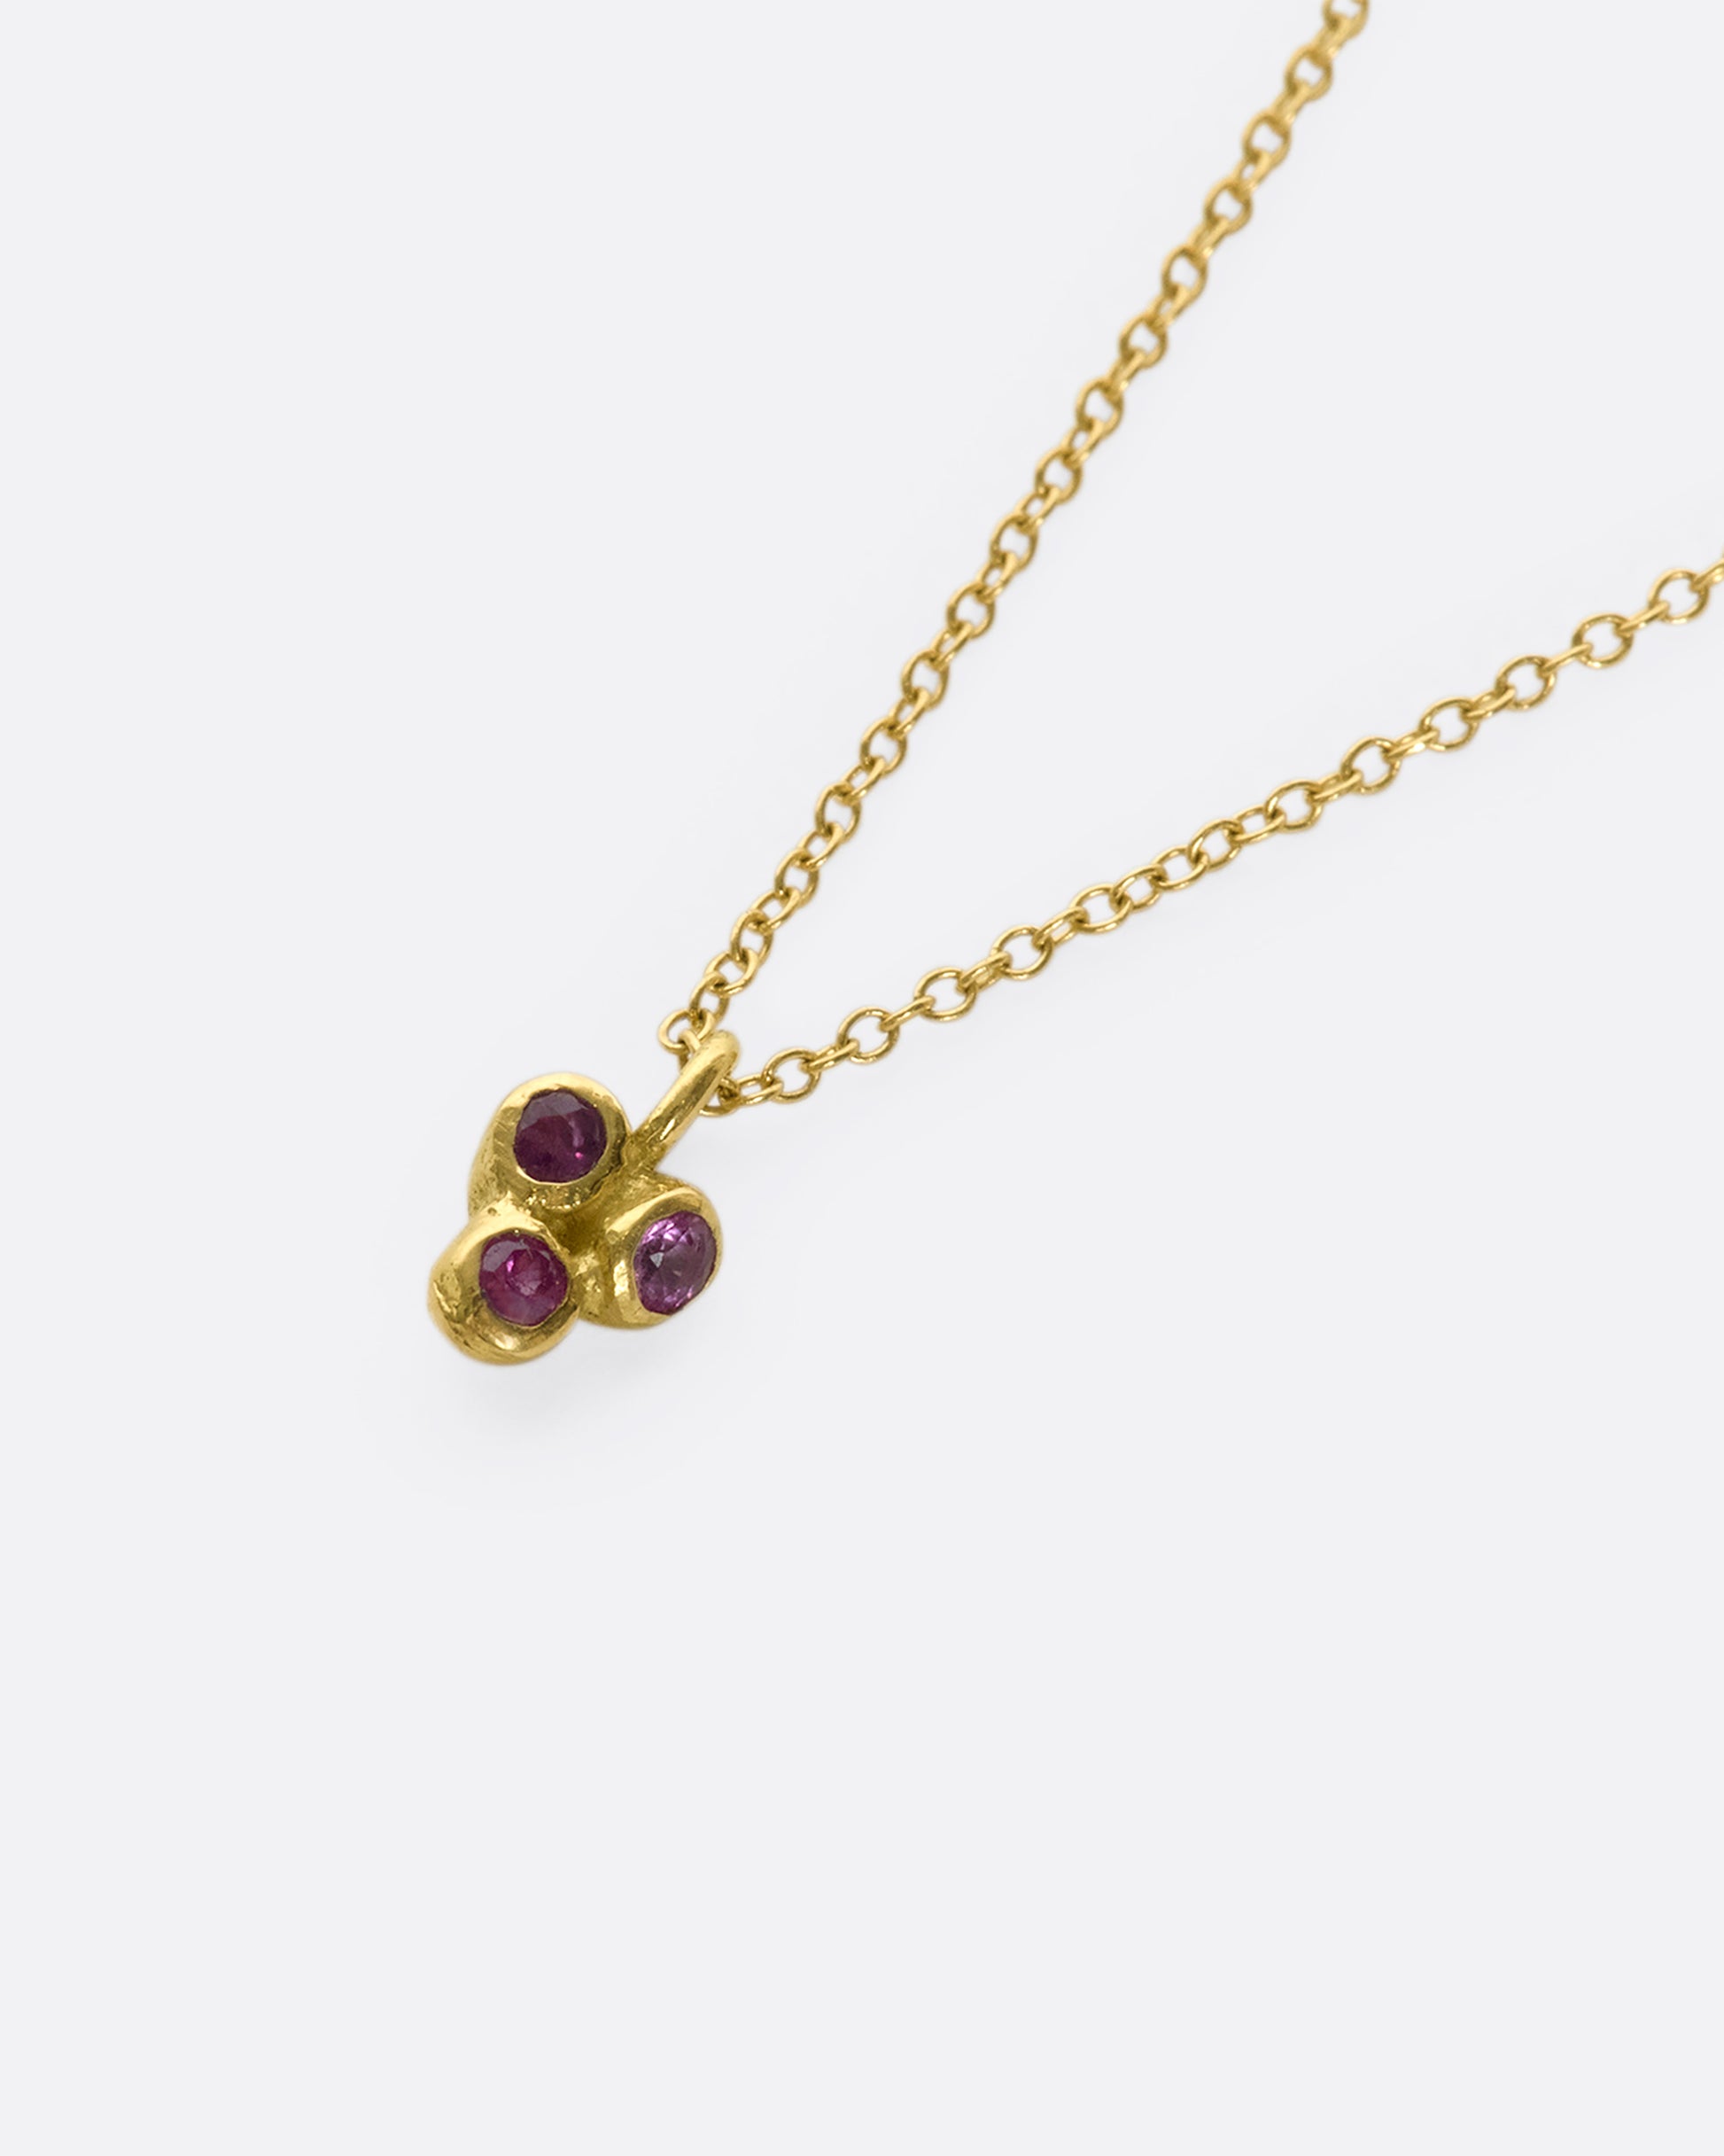 A sweet 18k gold and ruby pendant swinging on a fine gold chain